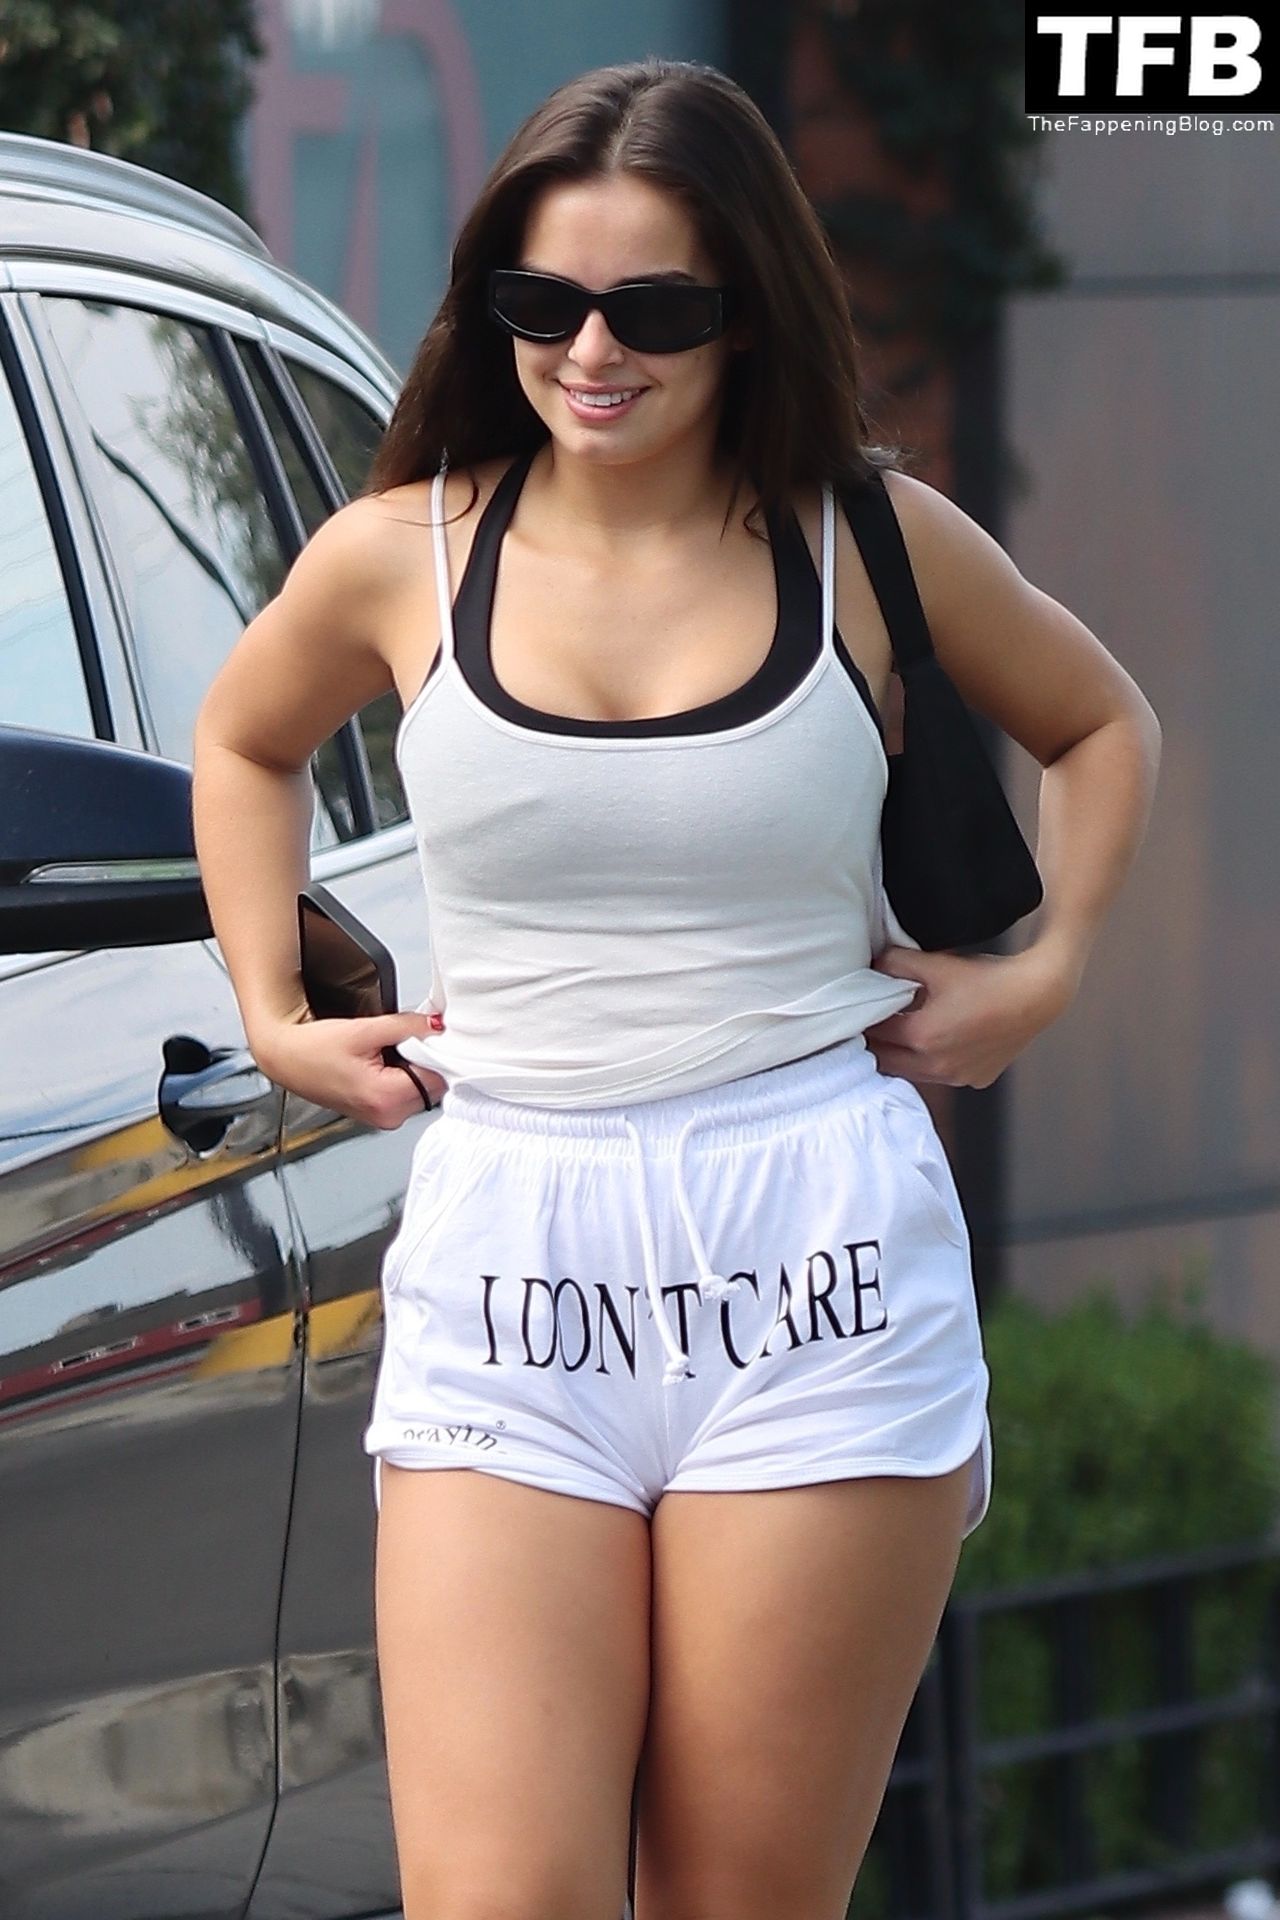 Addison Rae Sports Short Shorts with the Message “I Don’t Care“ While Leaving Her Workout (84 Photos)